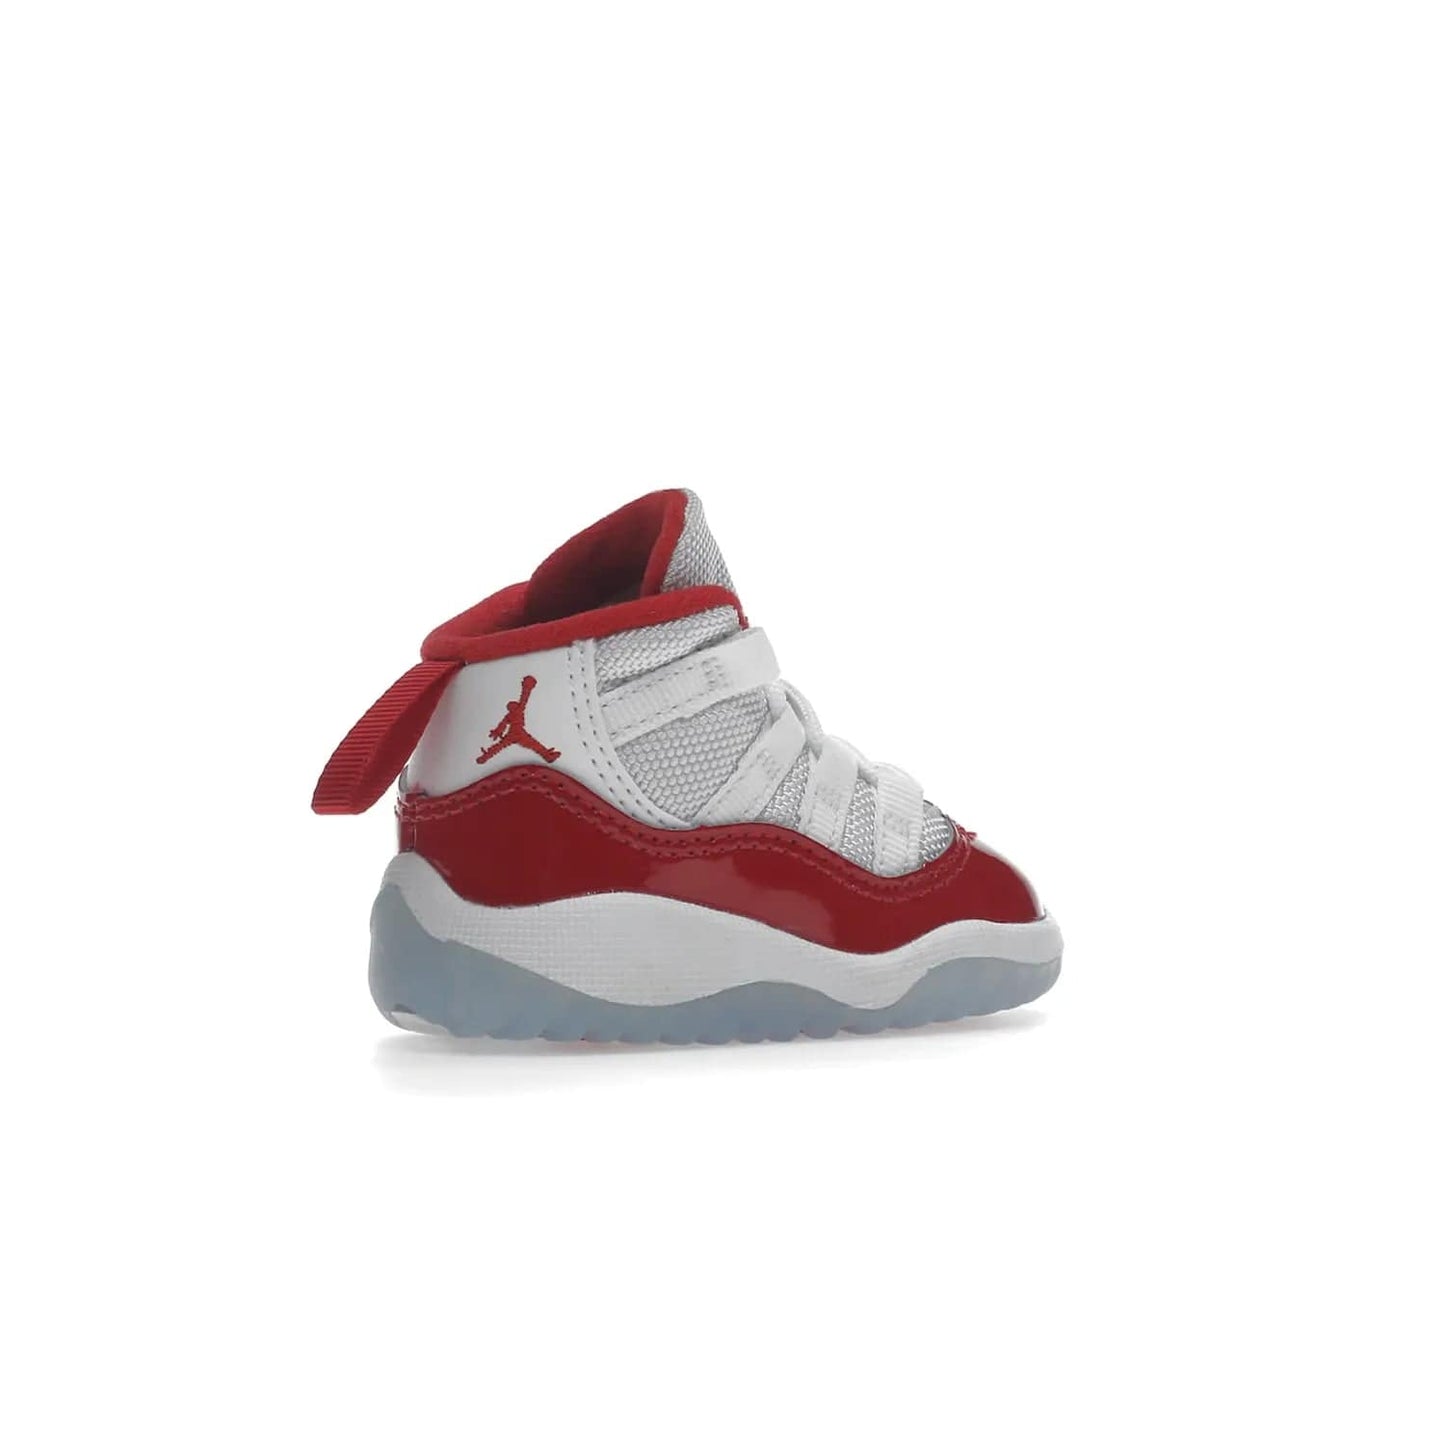 Jordan 11 Retro Cherry (2022) (TD) - Image 34 - Only at www.BallersClubKickz.com - Timeless classic. Air Jordan 11 Retro Cherry 2022 TD combines mesh, leather & suede for a unique look. White upper with varsity red suede. Jumpman logo on collar & tongue. Available Dec 10th, priced at $80.